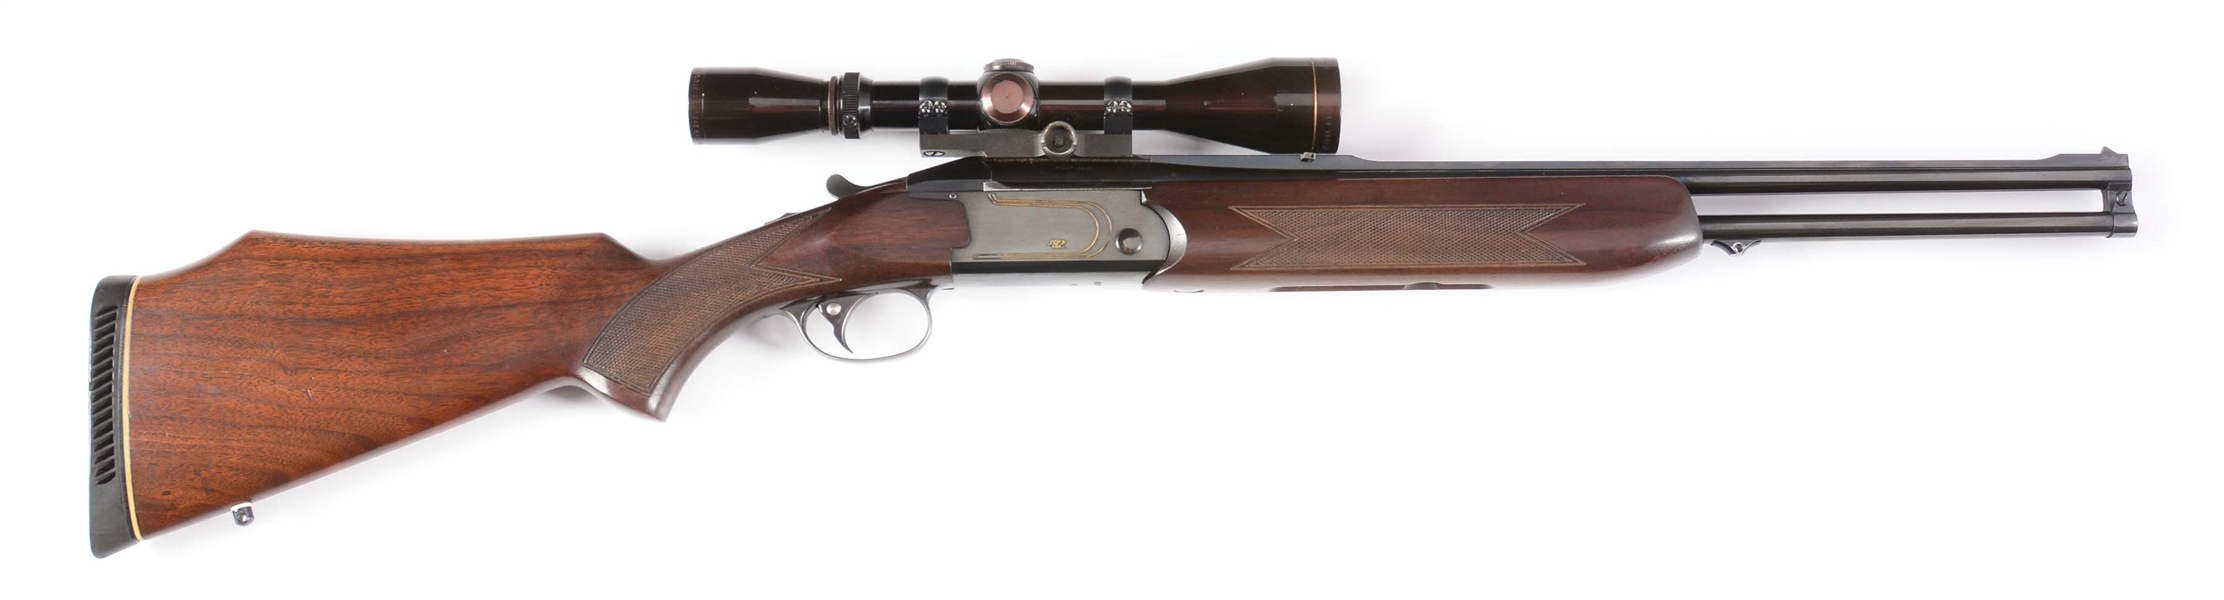 (M) VALMET MODEL 412 OVER-UNDER DOUBLE RIFLE WITH SCOPE.